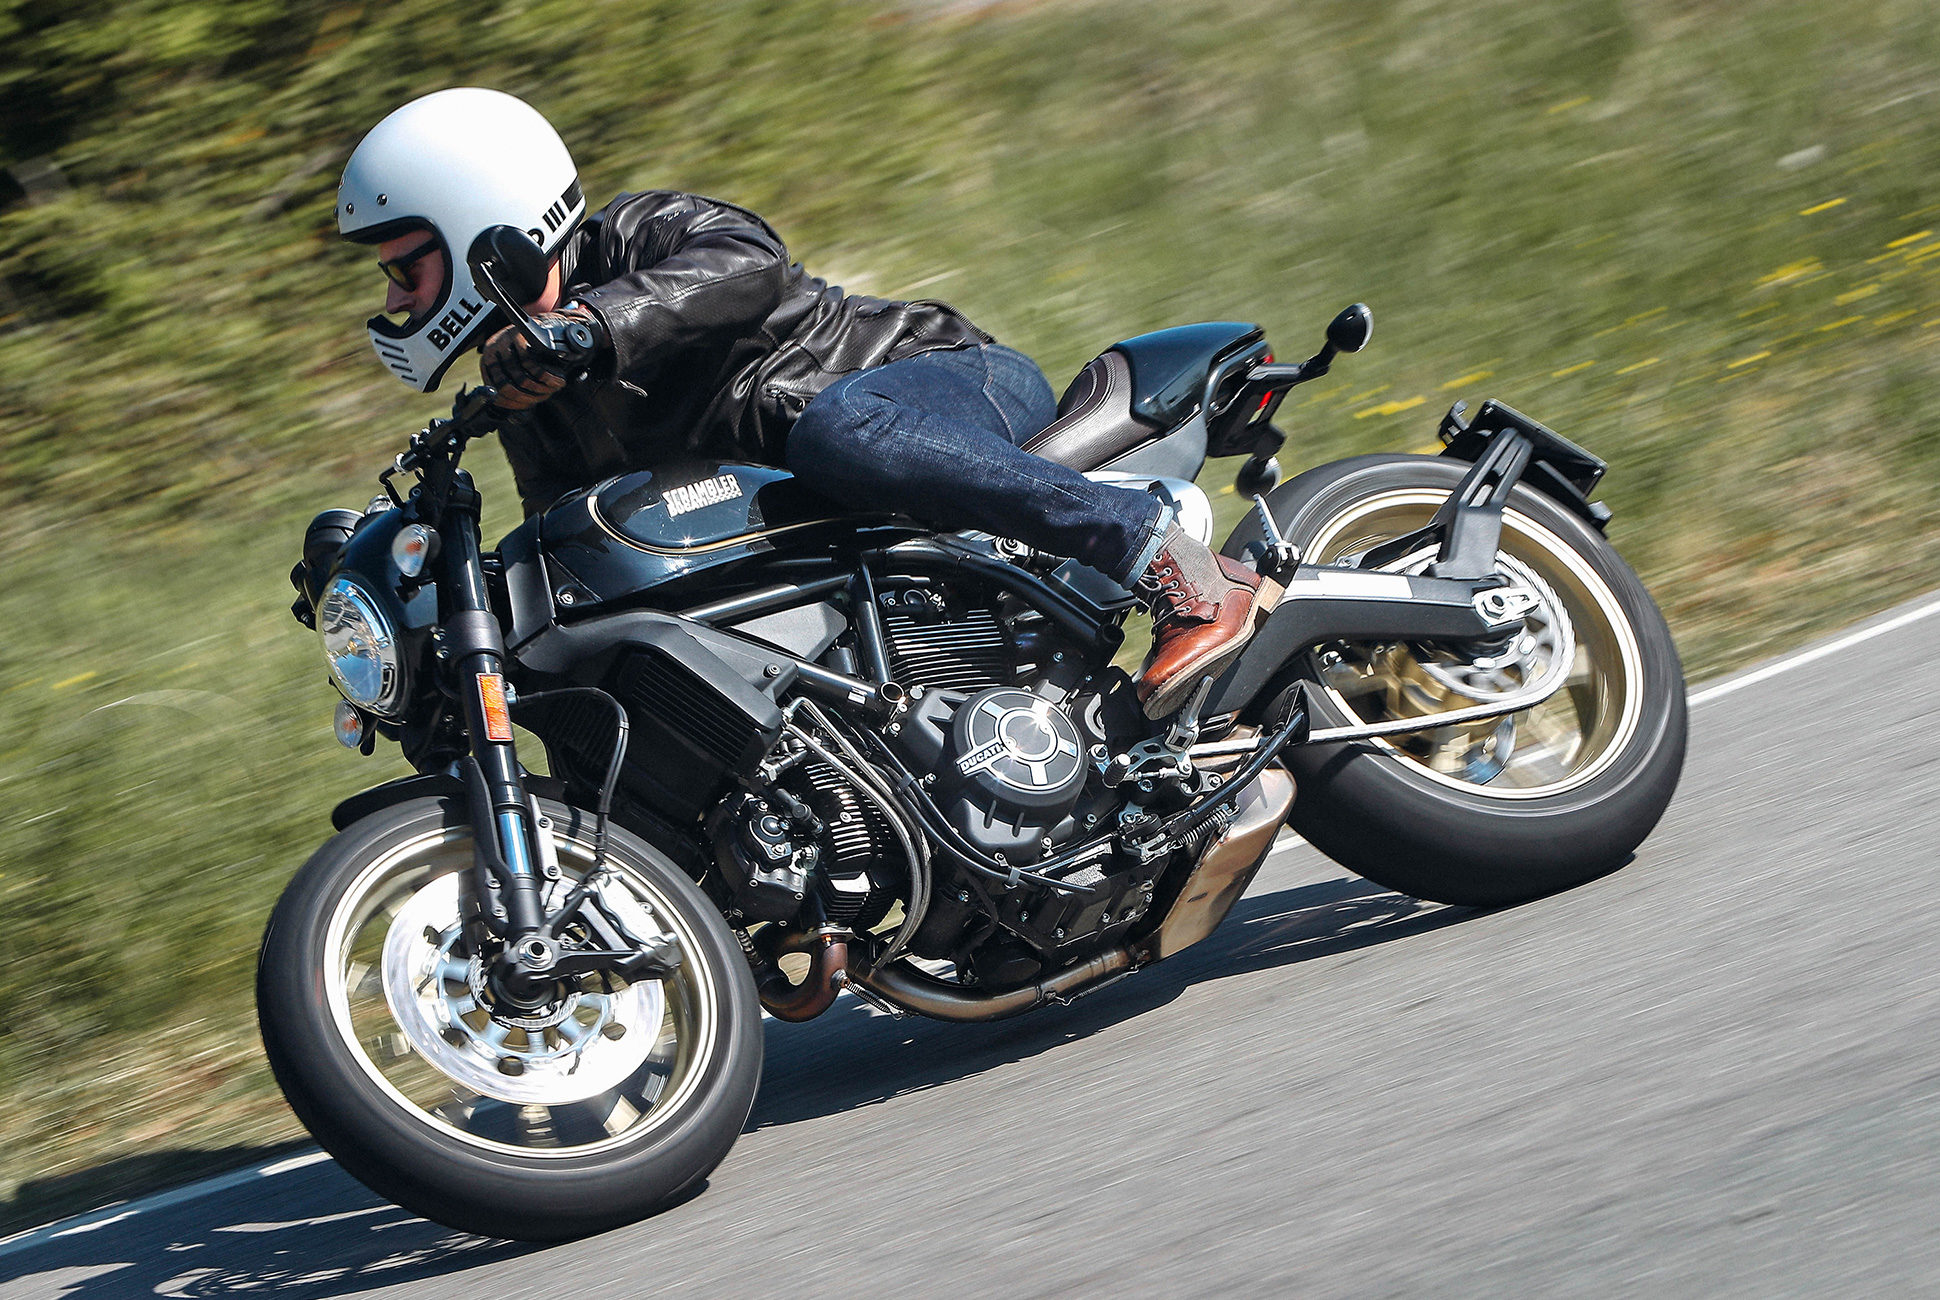 Review: Ducati's New Scrambler Cafe Racer Is a a Relative Bargain ...